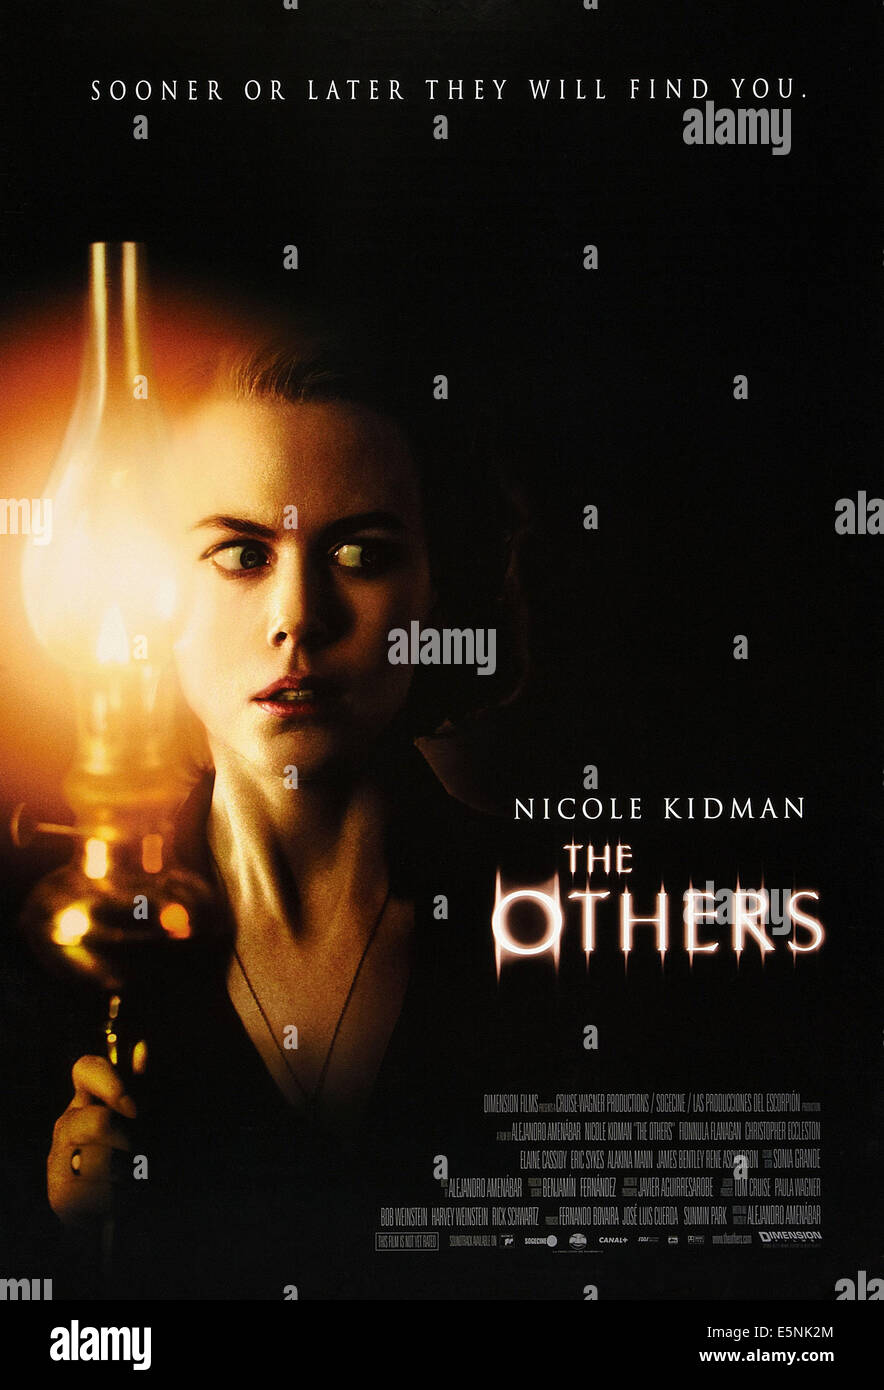 THE OTHERS, US poster, Nicole Kidman, 2001, © Dimension Films/courtesy Everett Collection Stock Photo